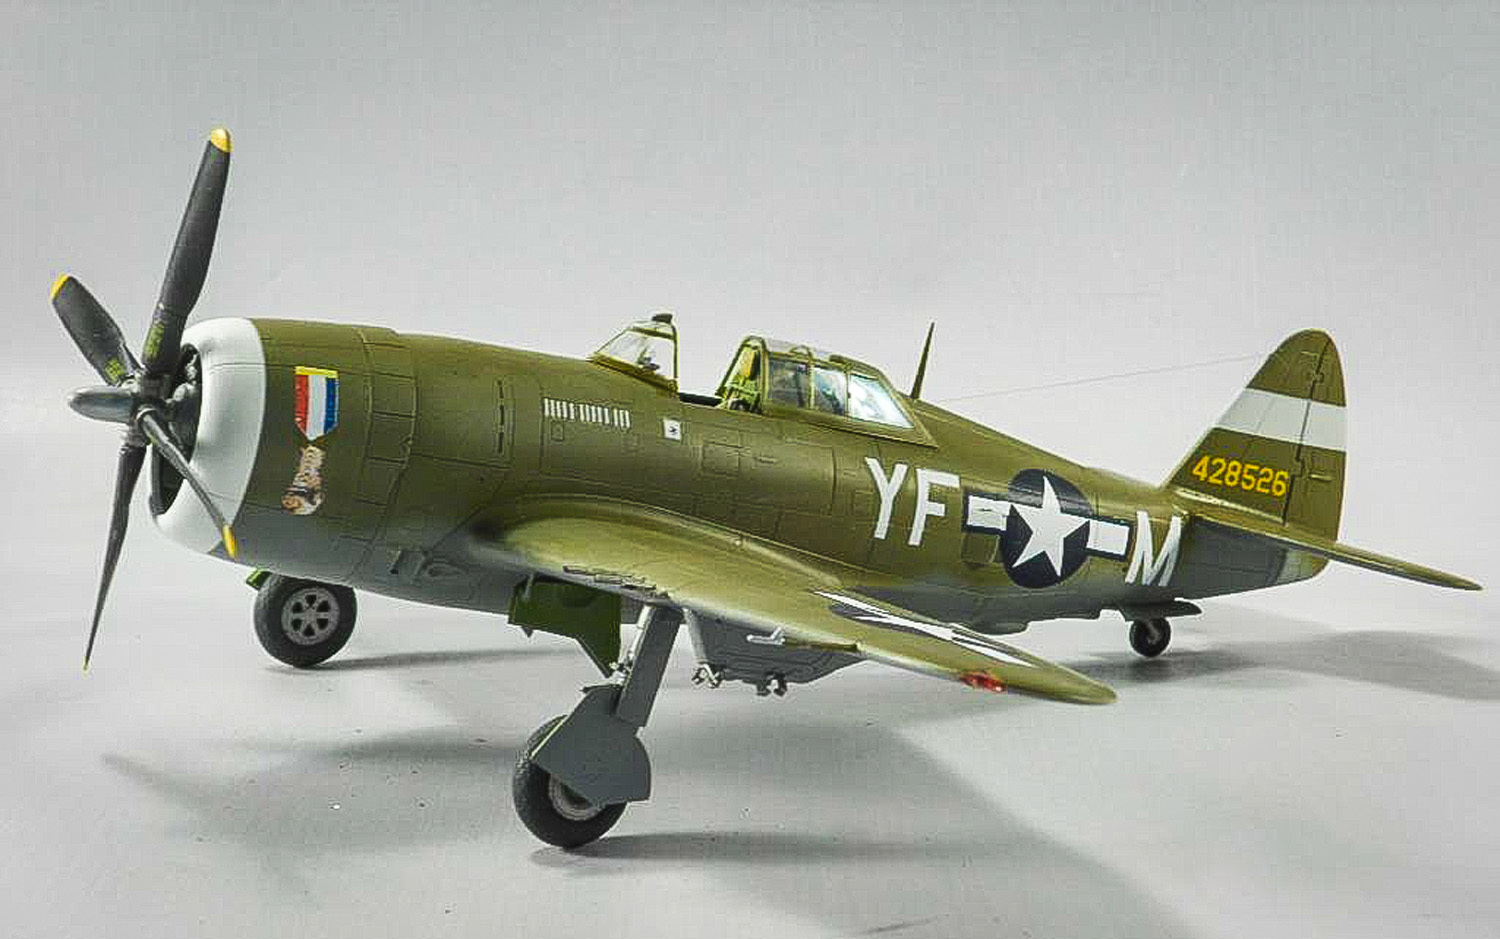 A replica of the Golden Glove P-47 Thunderbolt piloted by Capt. Carl Ekstrom was created by Frank Cronin for Victoria Thomson in memory of her father. Ekstrom was shot down over France following a bomber escort mission. (Courtesy photo)